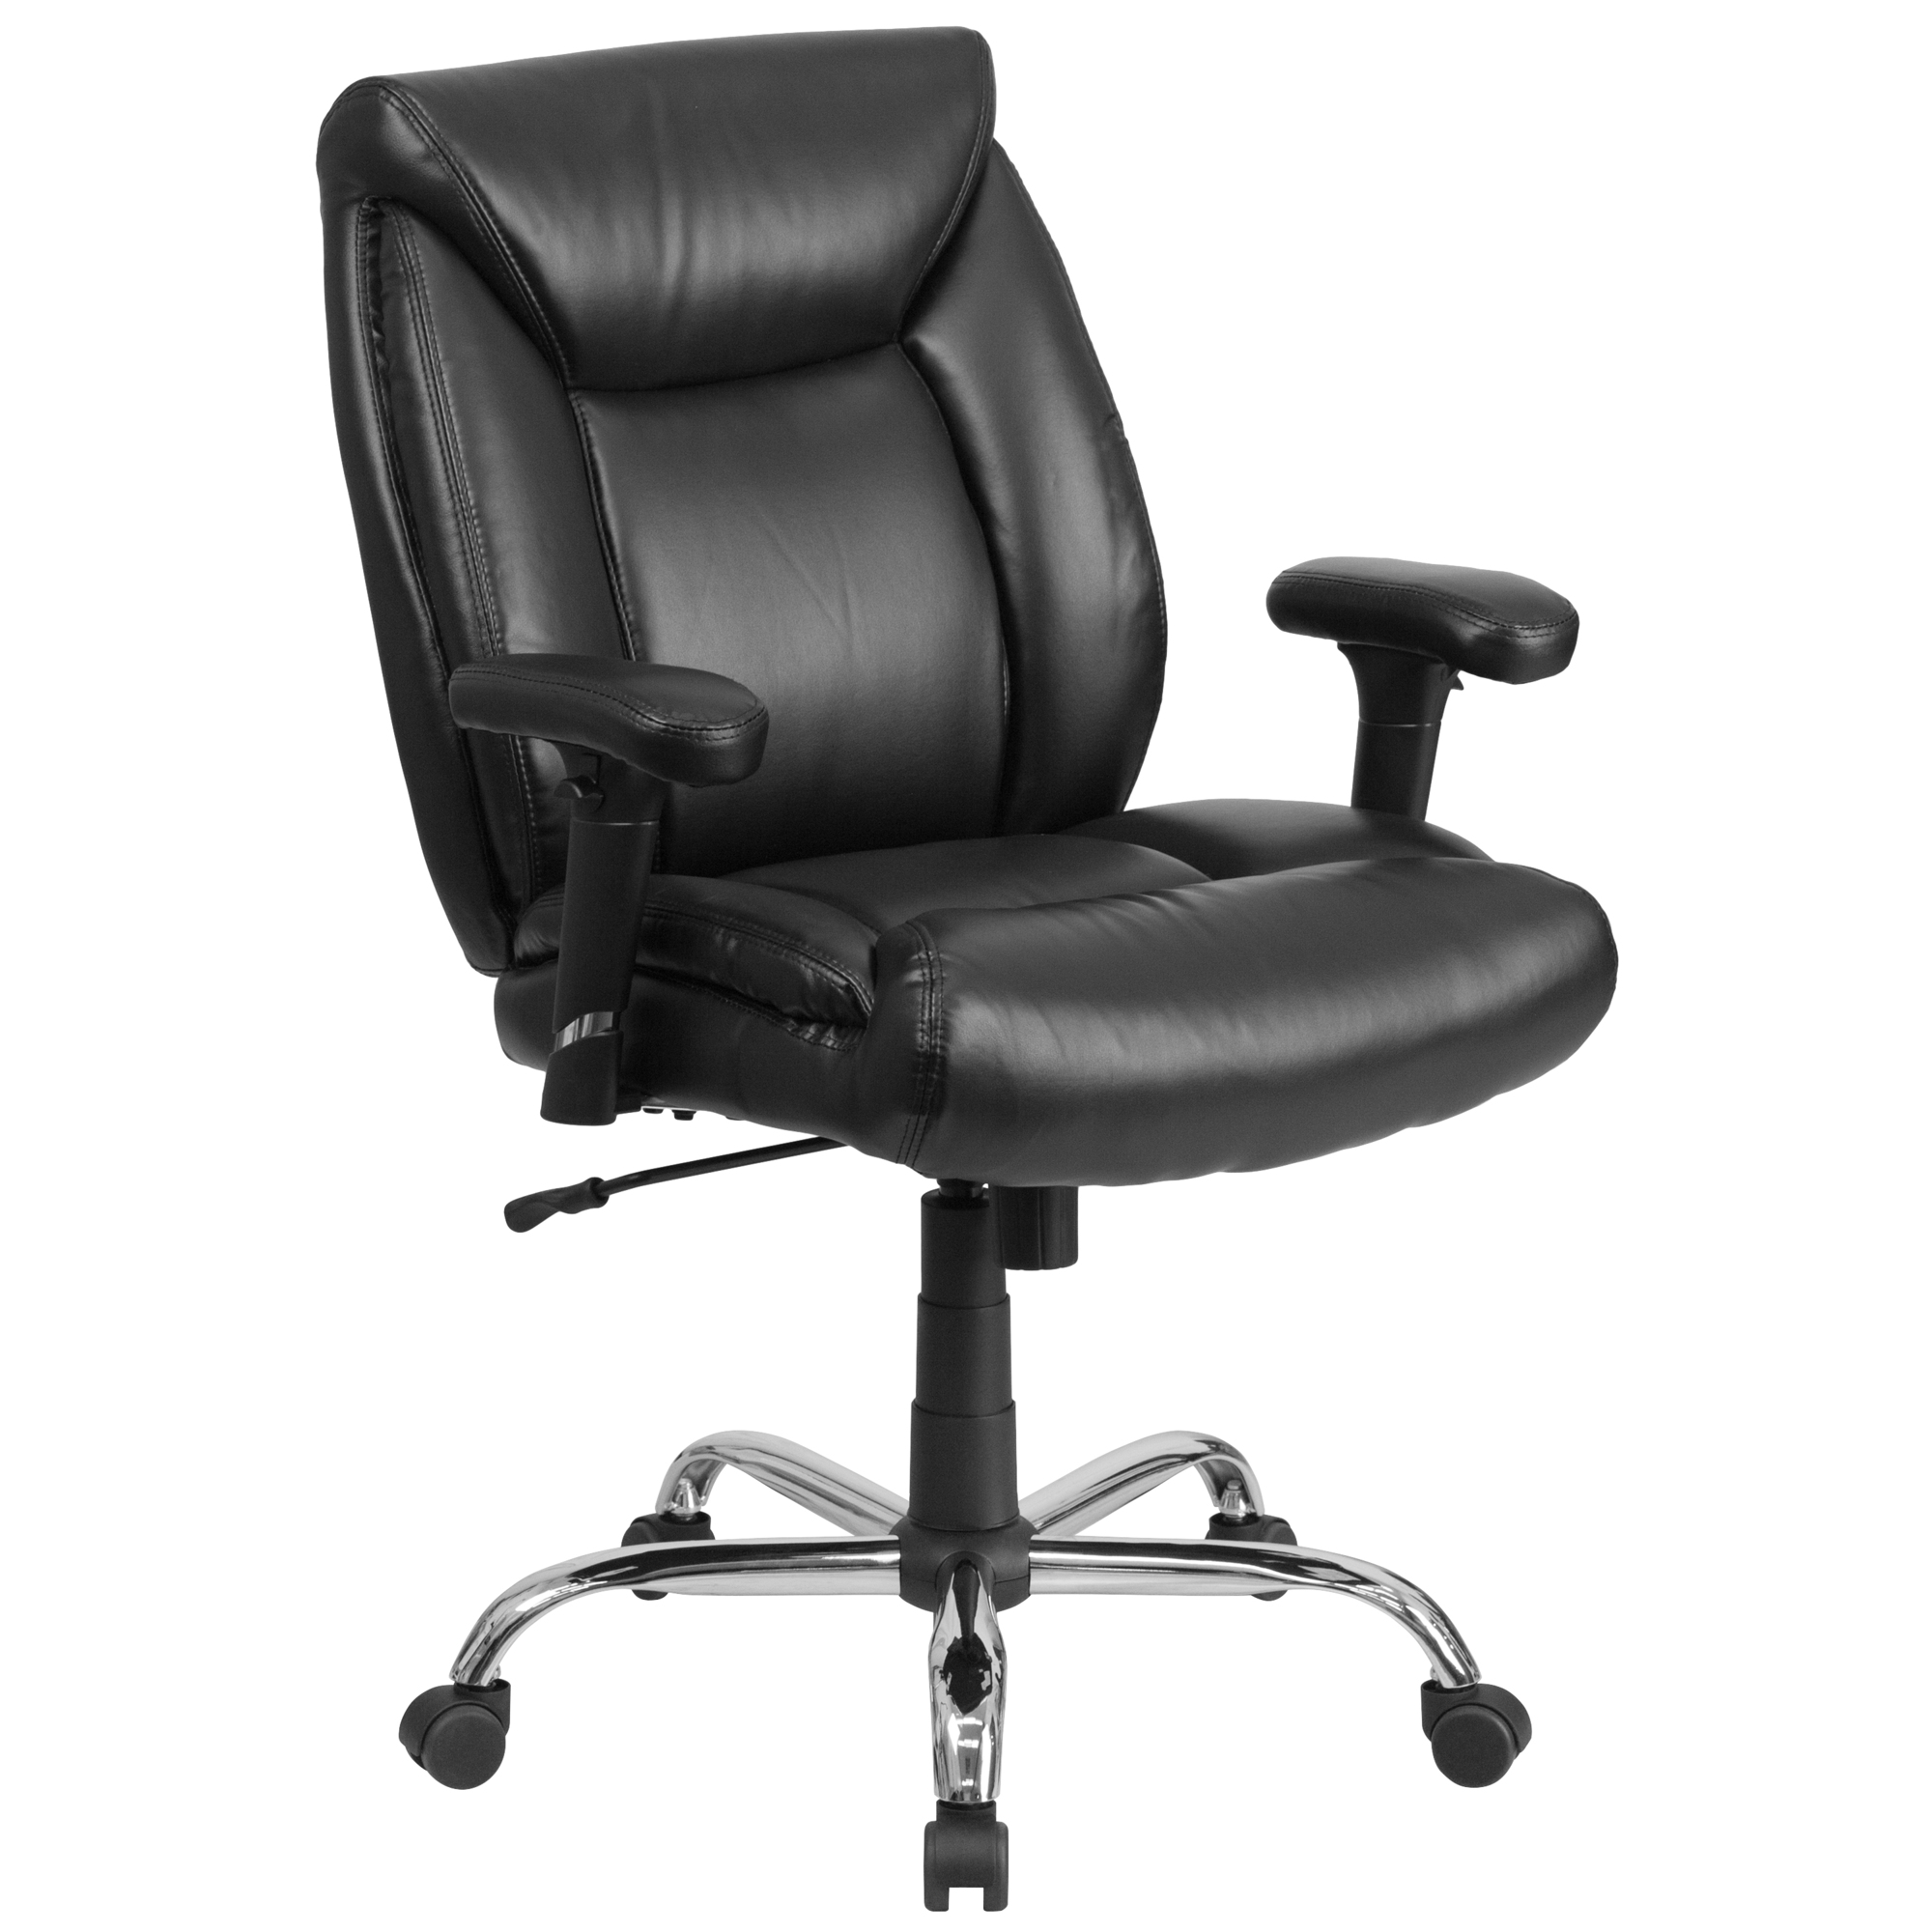 Flash Furniture, 400 lb. Rated Mid-Back Black LeatherSoft Chair, Primary Color Black, Included (qty.) 1, Model GO2073LEA